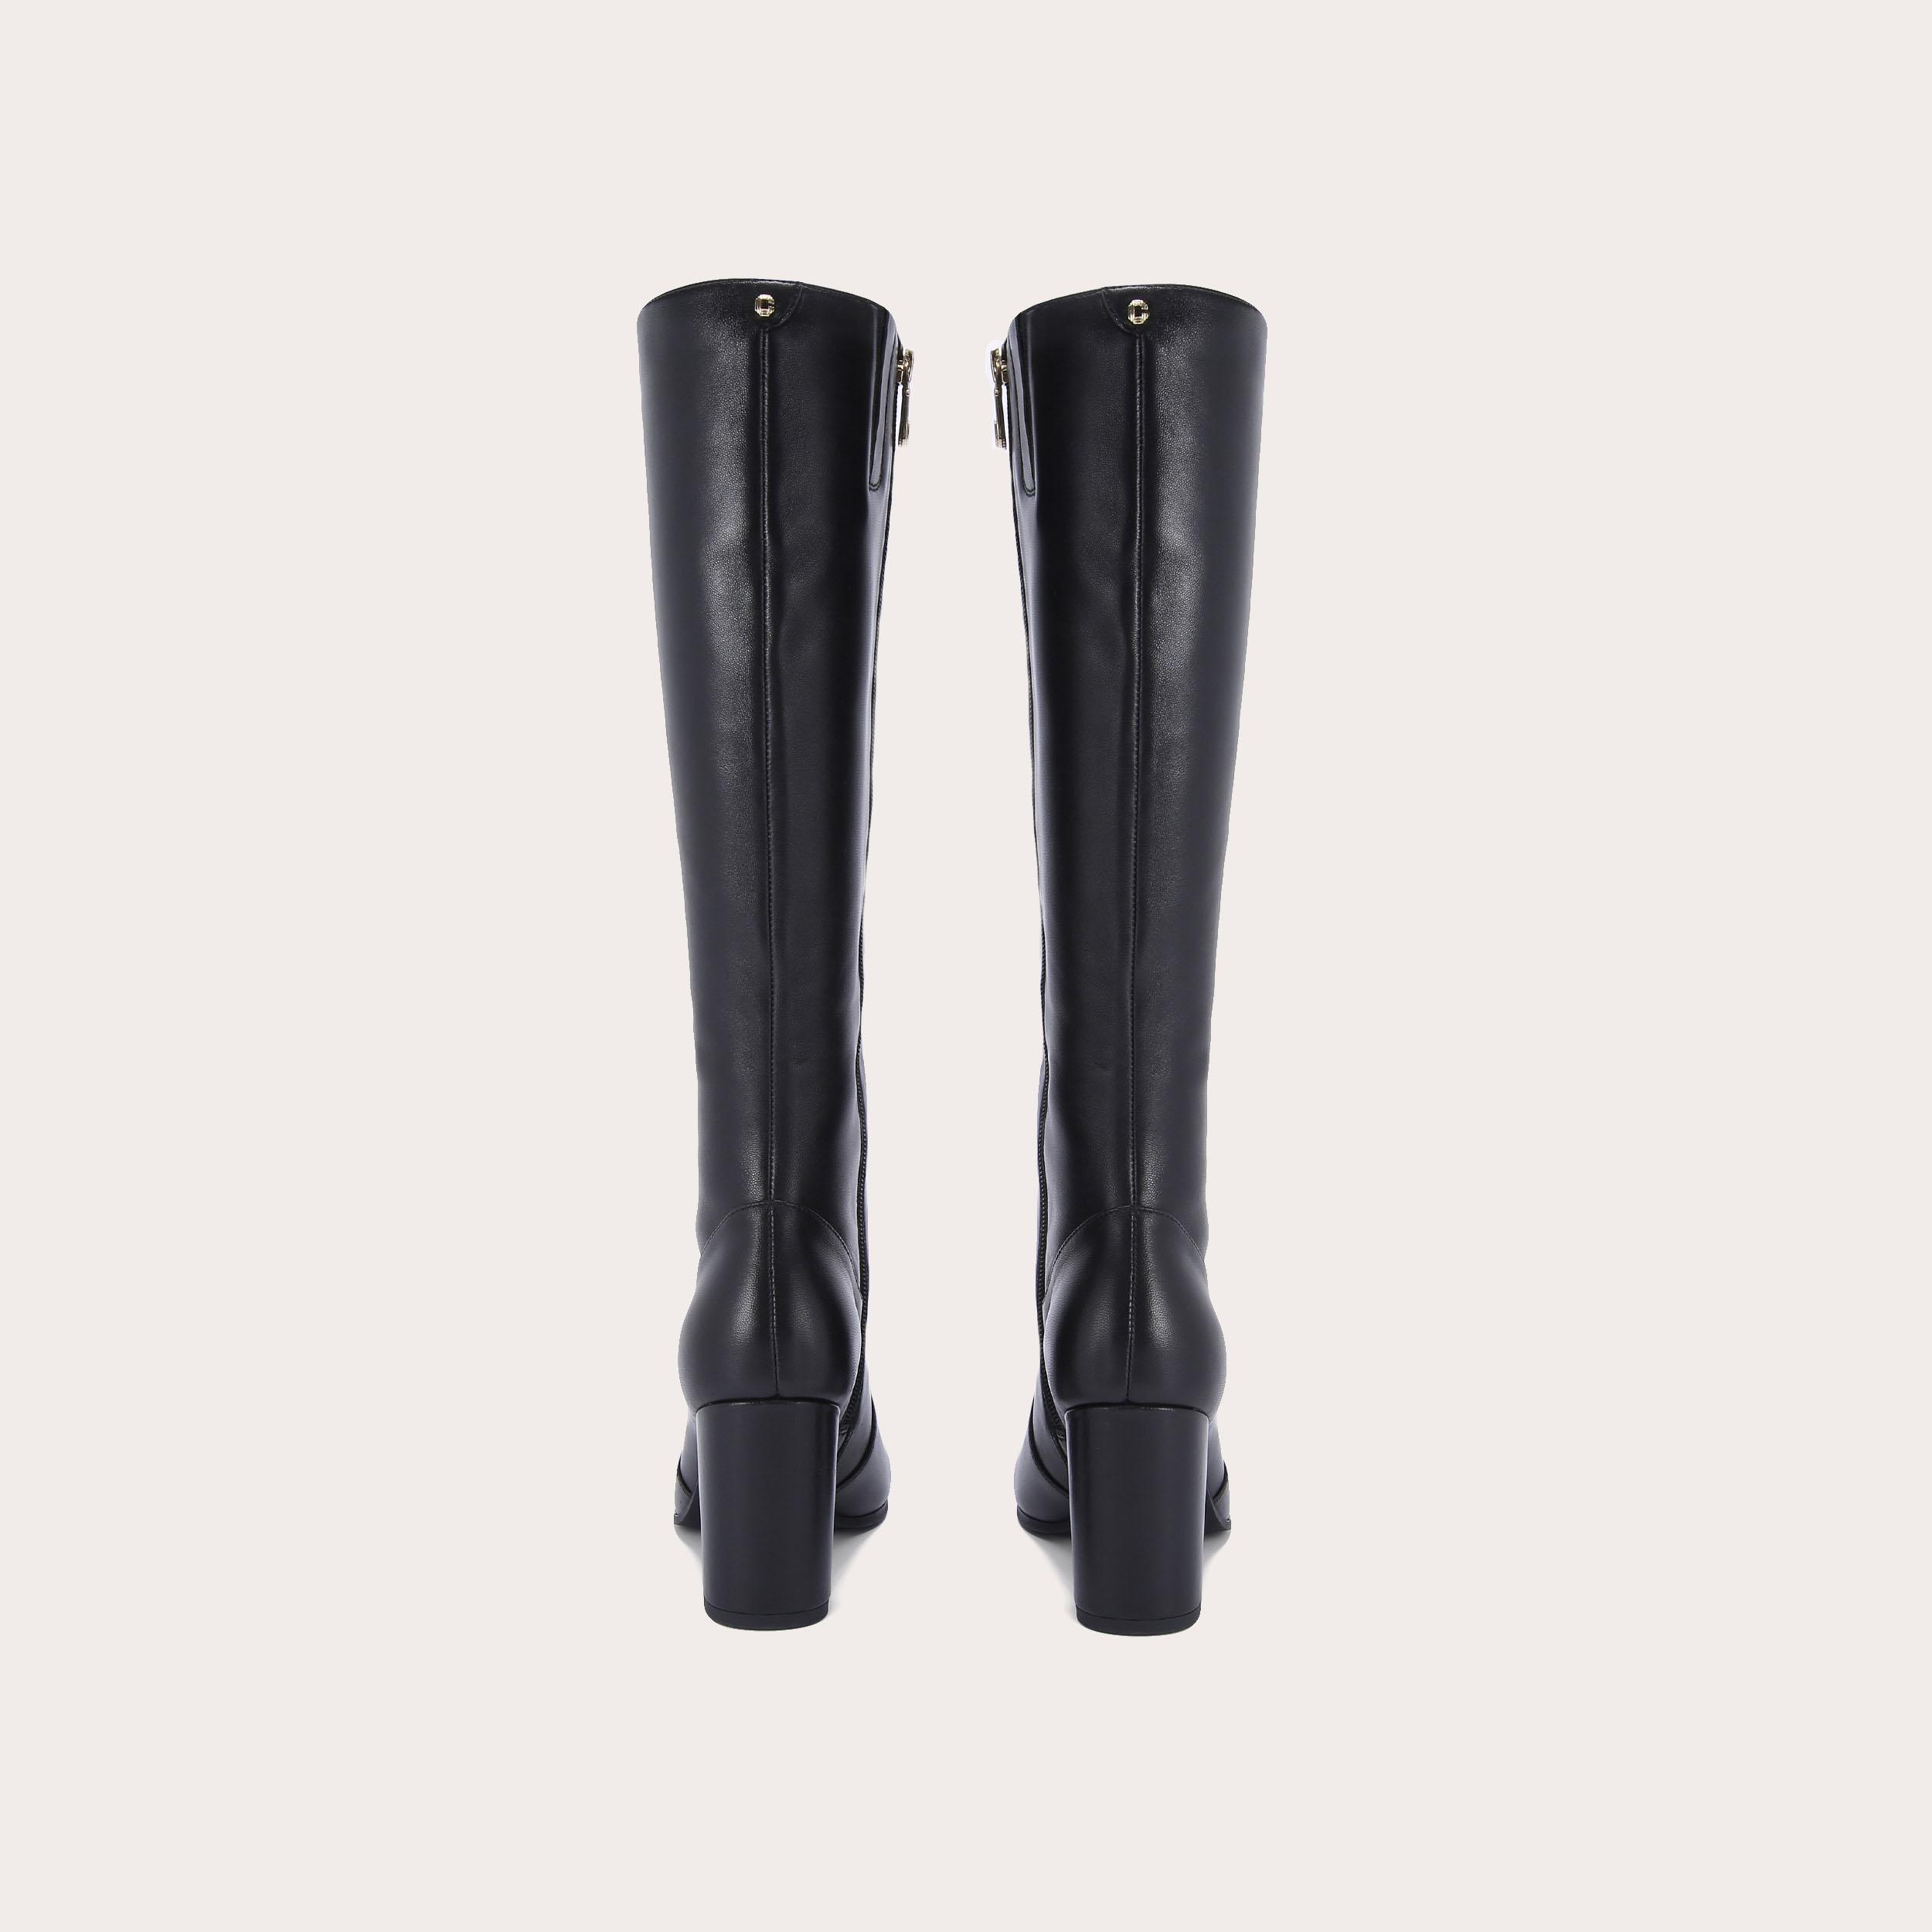 POSE KNEE HIGH Black Knee High Leather Boots by CARVELA